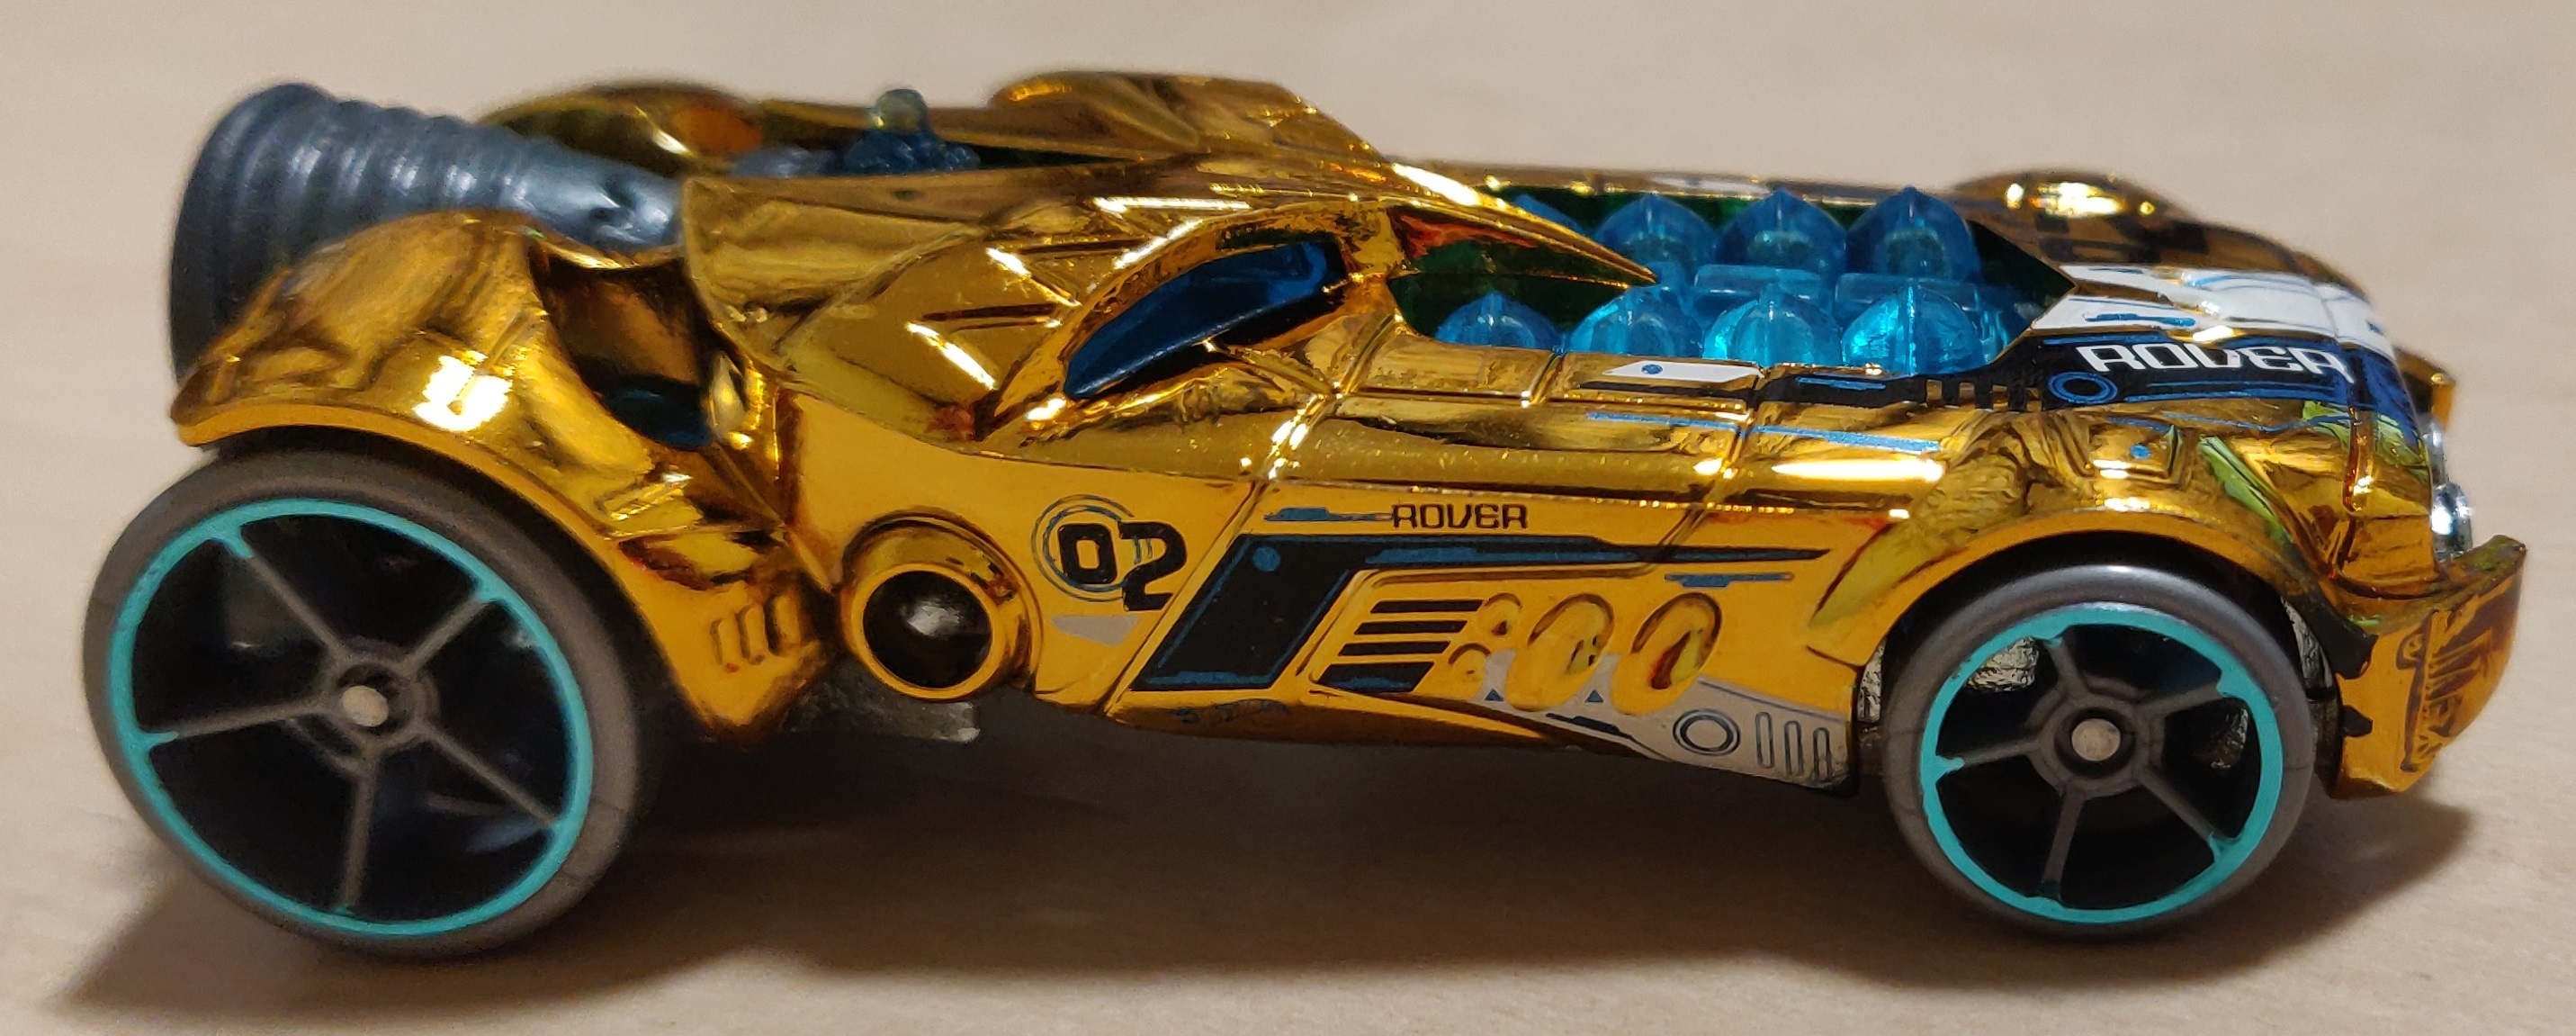 Hot Wheels Rocket Fire Gold Chrome Loose 2019 Multi-Pack Exclusive 